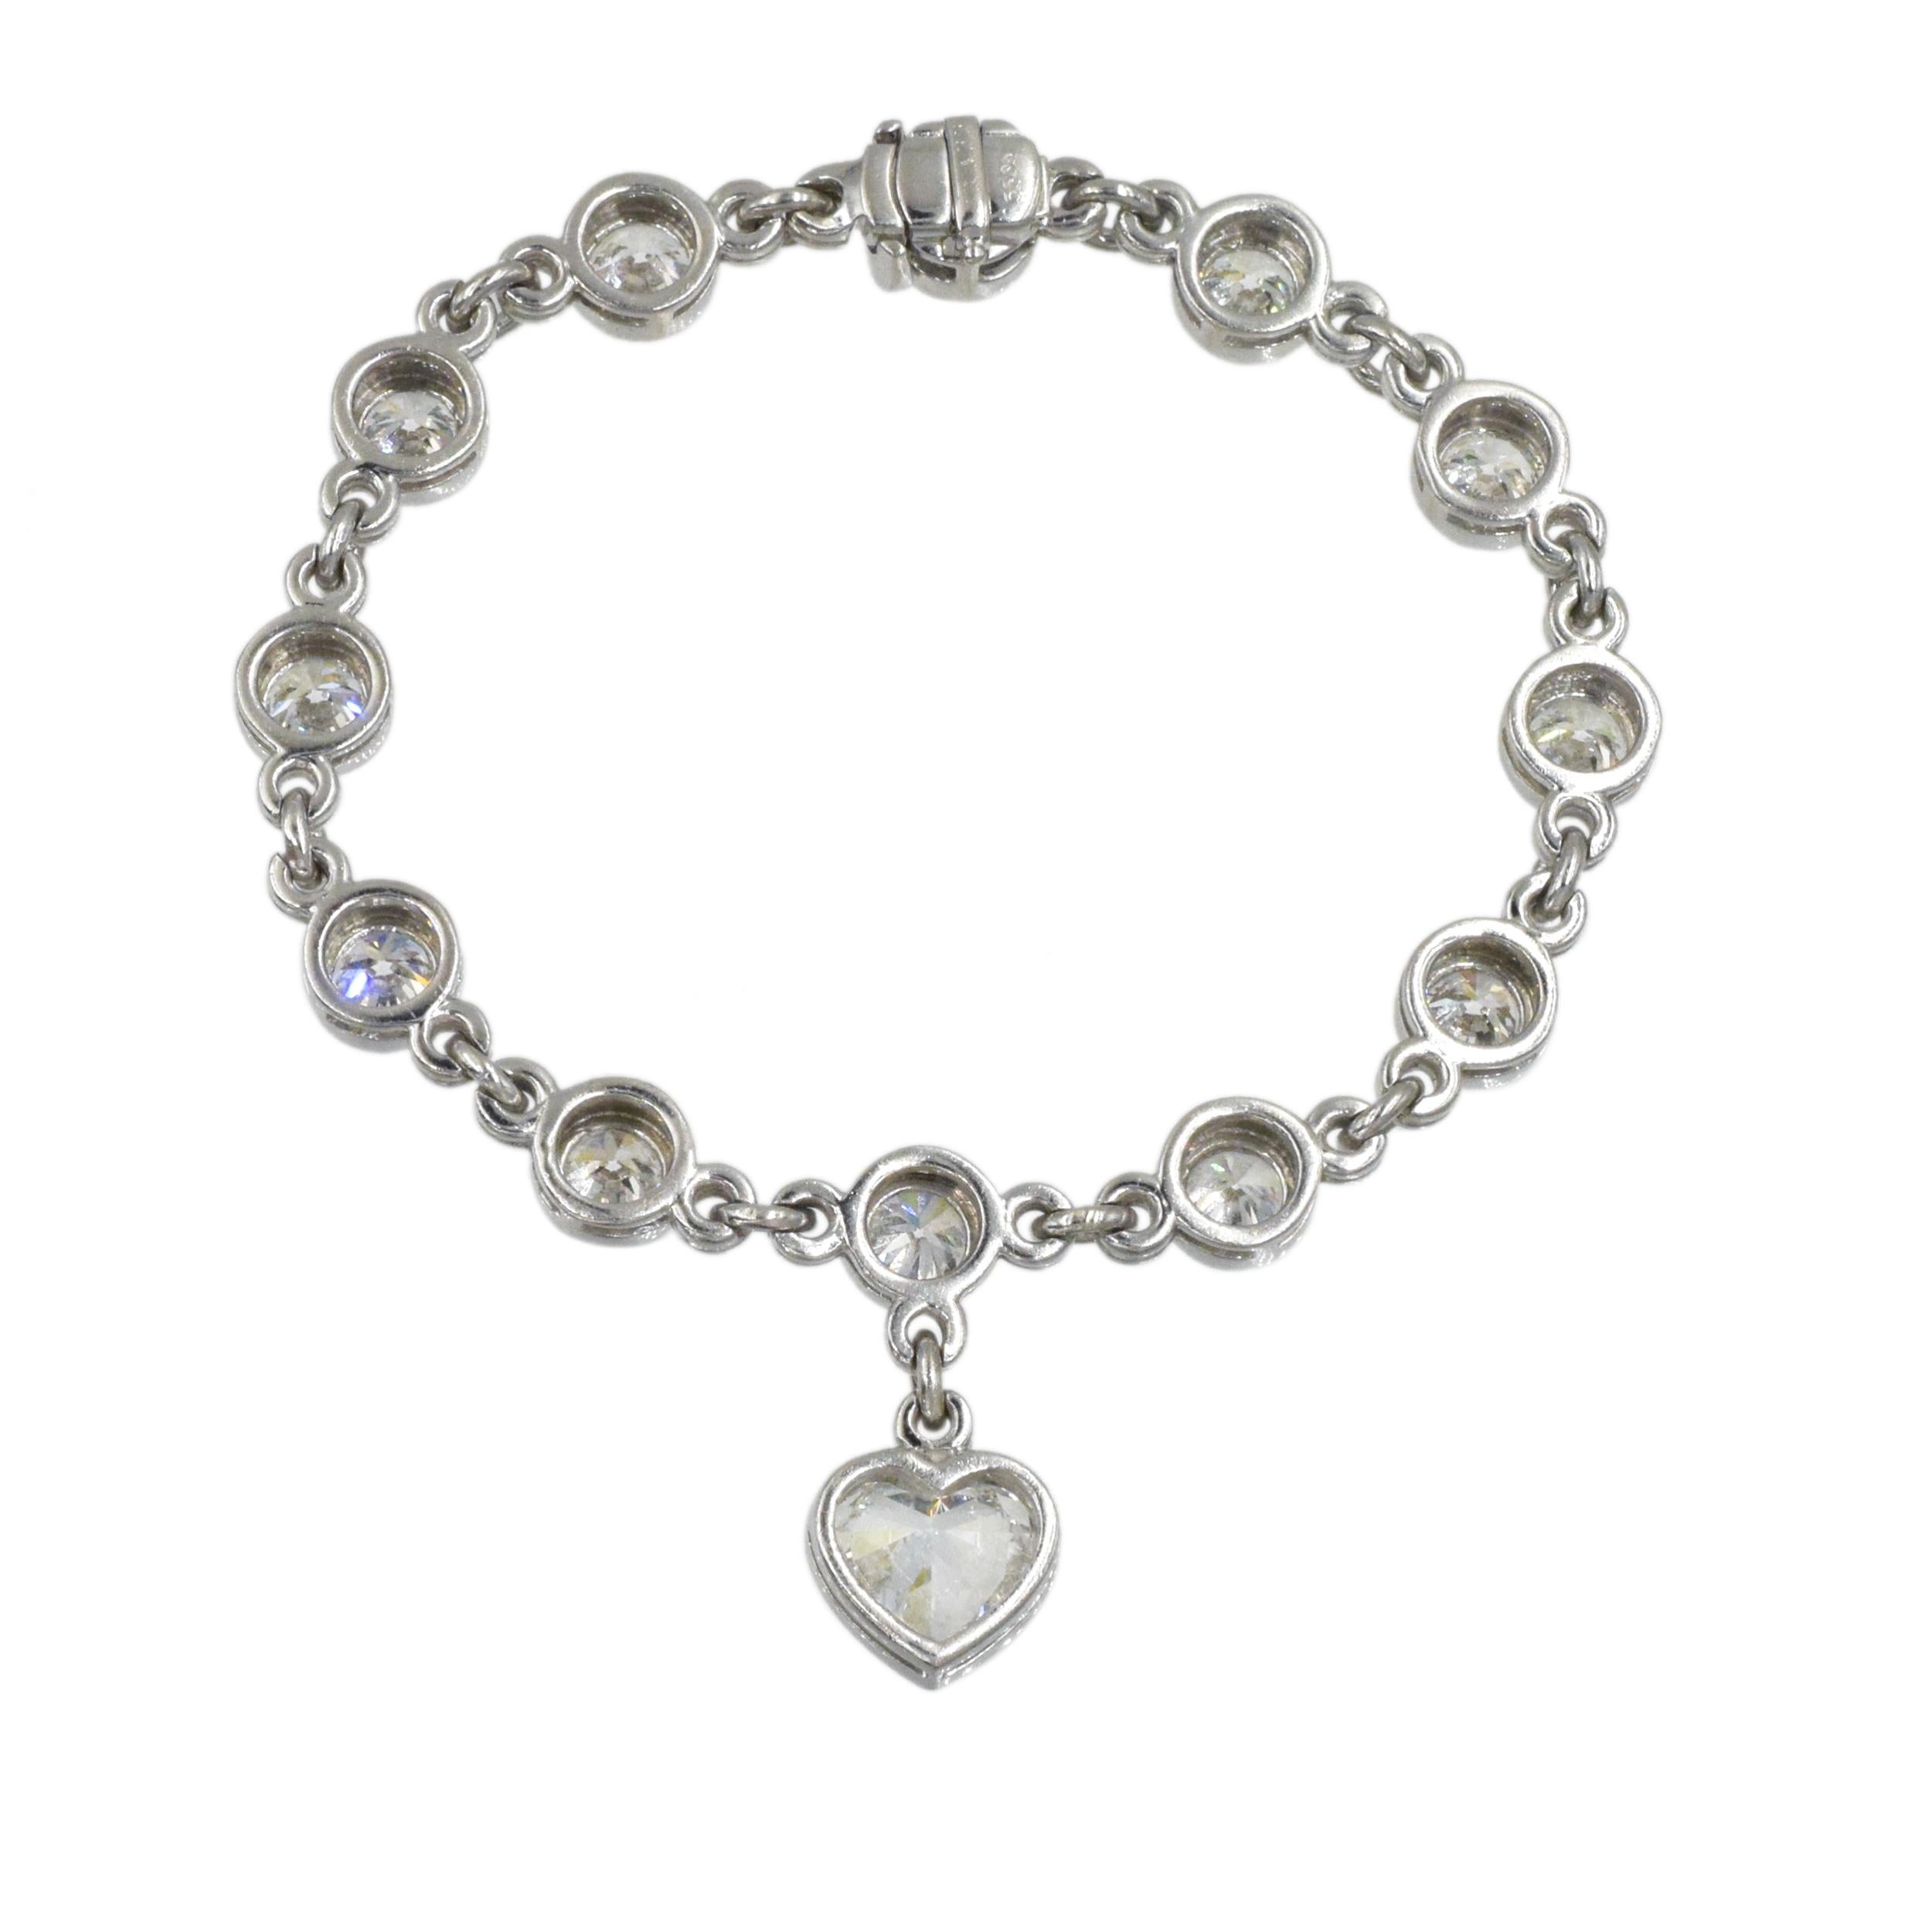 Graff Diamond Charm Bracelet In Platinum. 
The bracelet consist of 12 round brilliant cut diamonds with weight of approximately 8.00 carats, linked together, accented with heart-shaped diamond charm with weight of approximately 2.00ct. Color of the